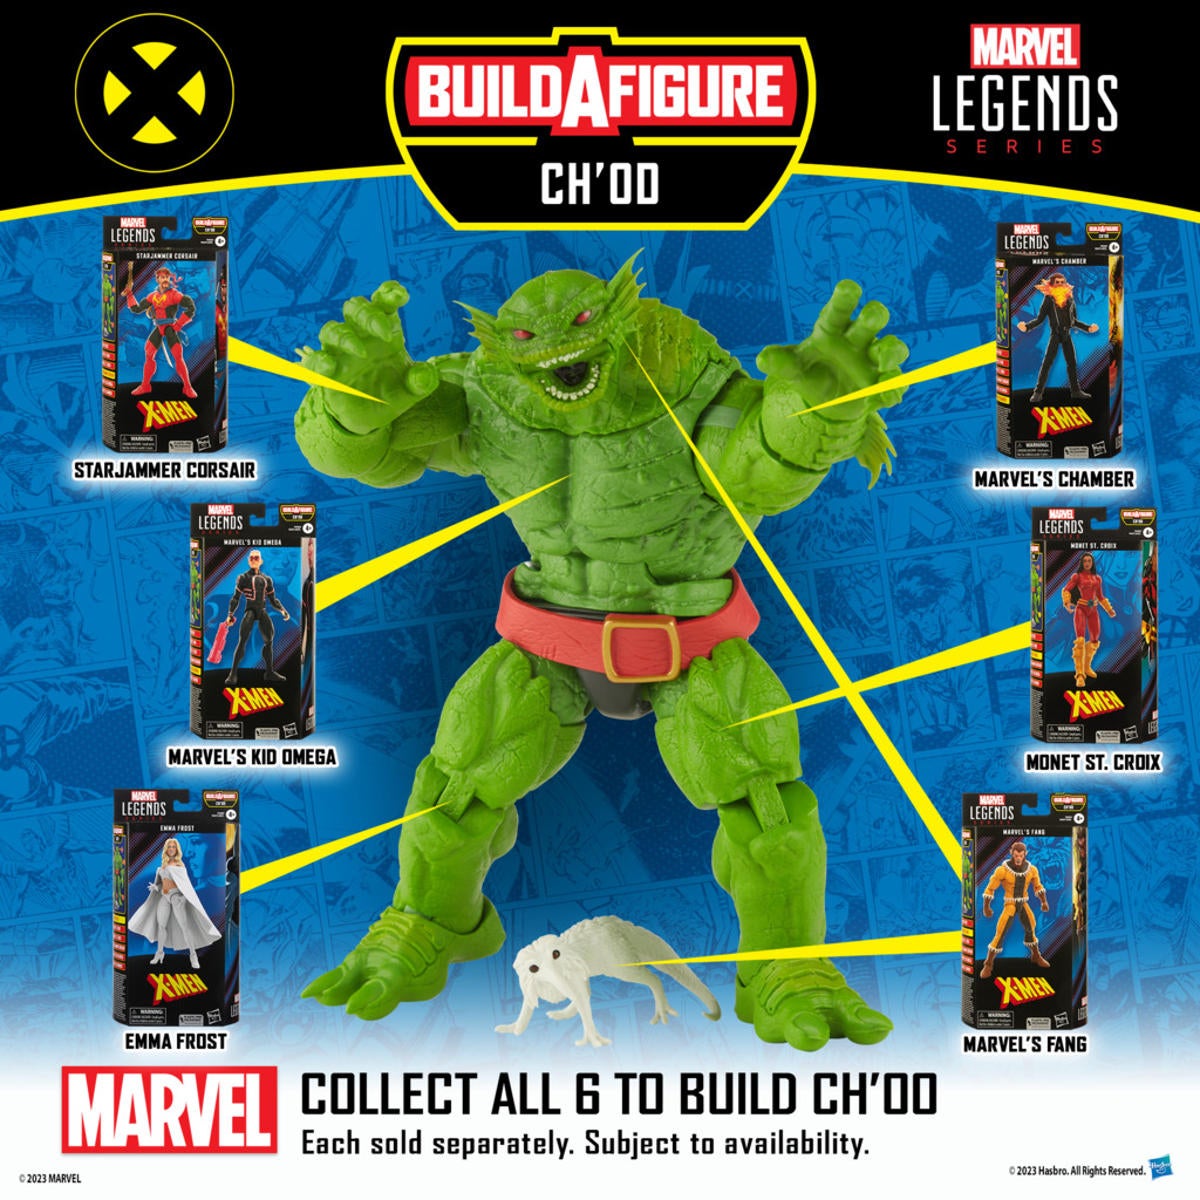 Marvel Legends X-Men Ch’od Build-A-Figure Wave Pre-Orders Are Available Now